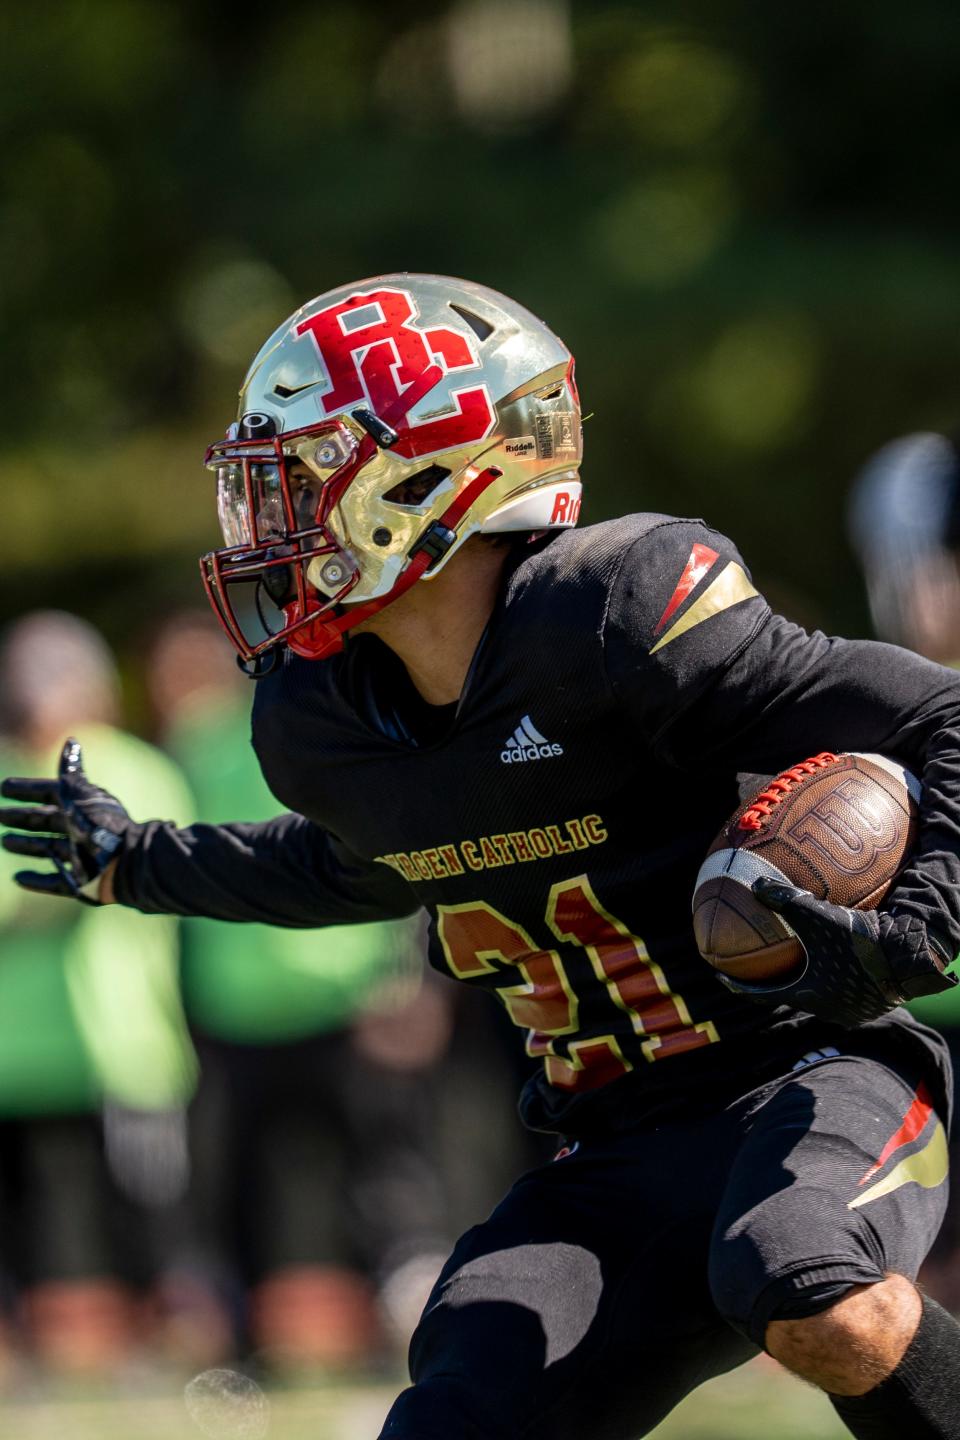 Bergen Catholic hosts Don Bosco in a football game in Oradell, NJ on Saturday September 24, 2022. BC #21 Anthony Perrotti with the ball. 